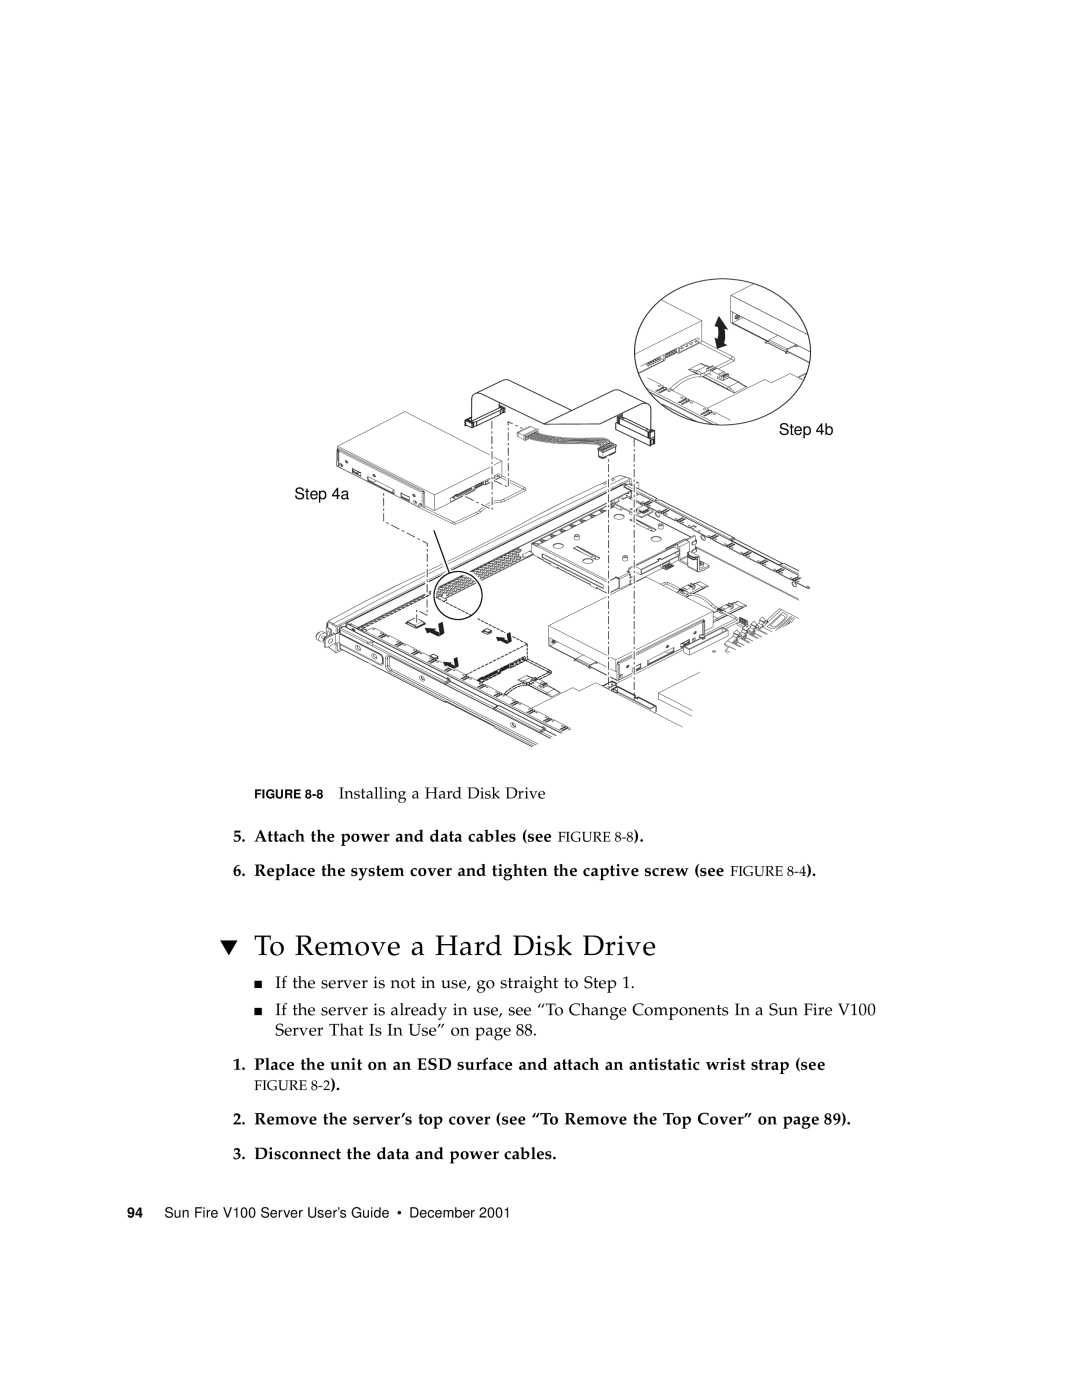 Sun Microsystems Sun Fire V100 manual To Remove a Hard Disk Drive, Attach the power and data cables see FIGURE, b a 